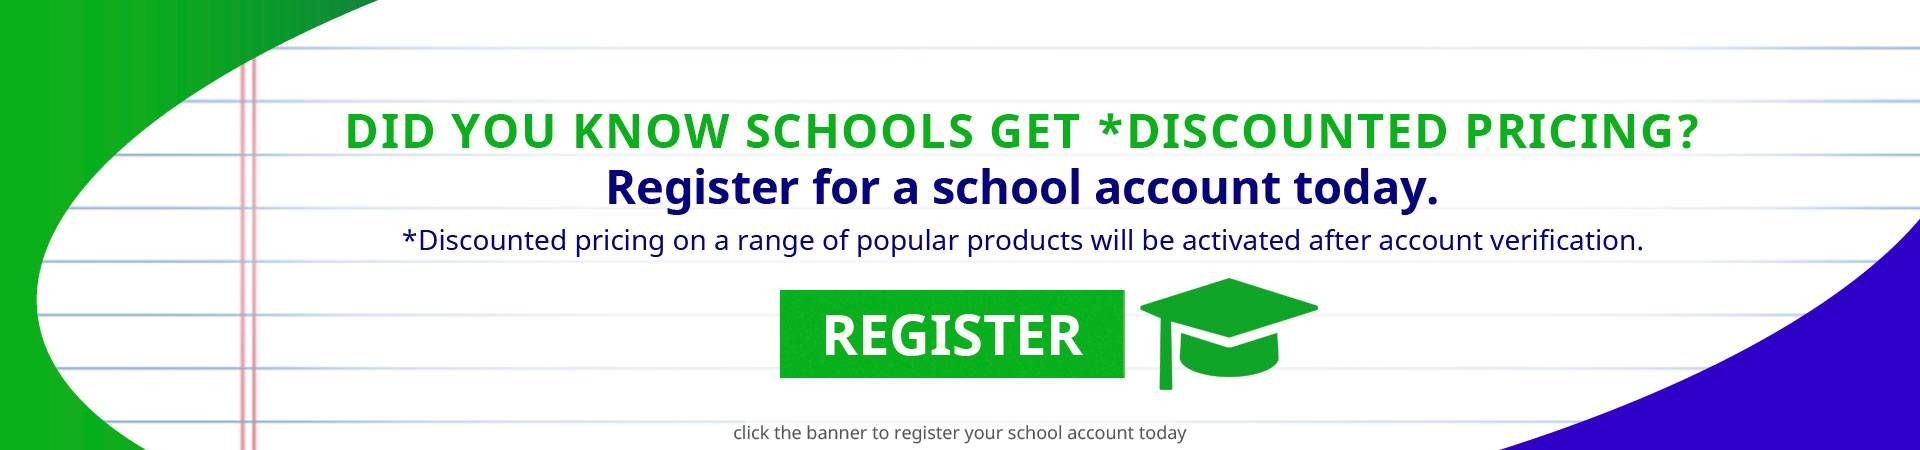 Register for a school account to get access to discounted pricing!